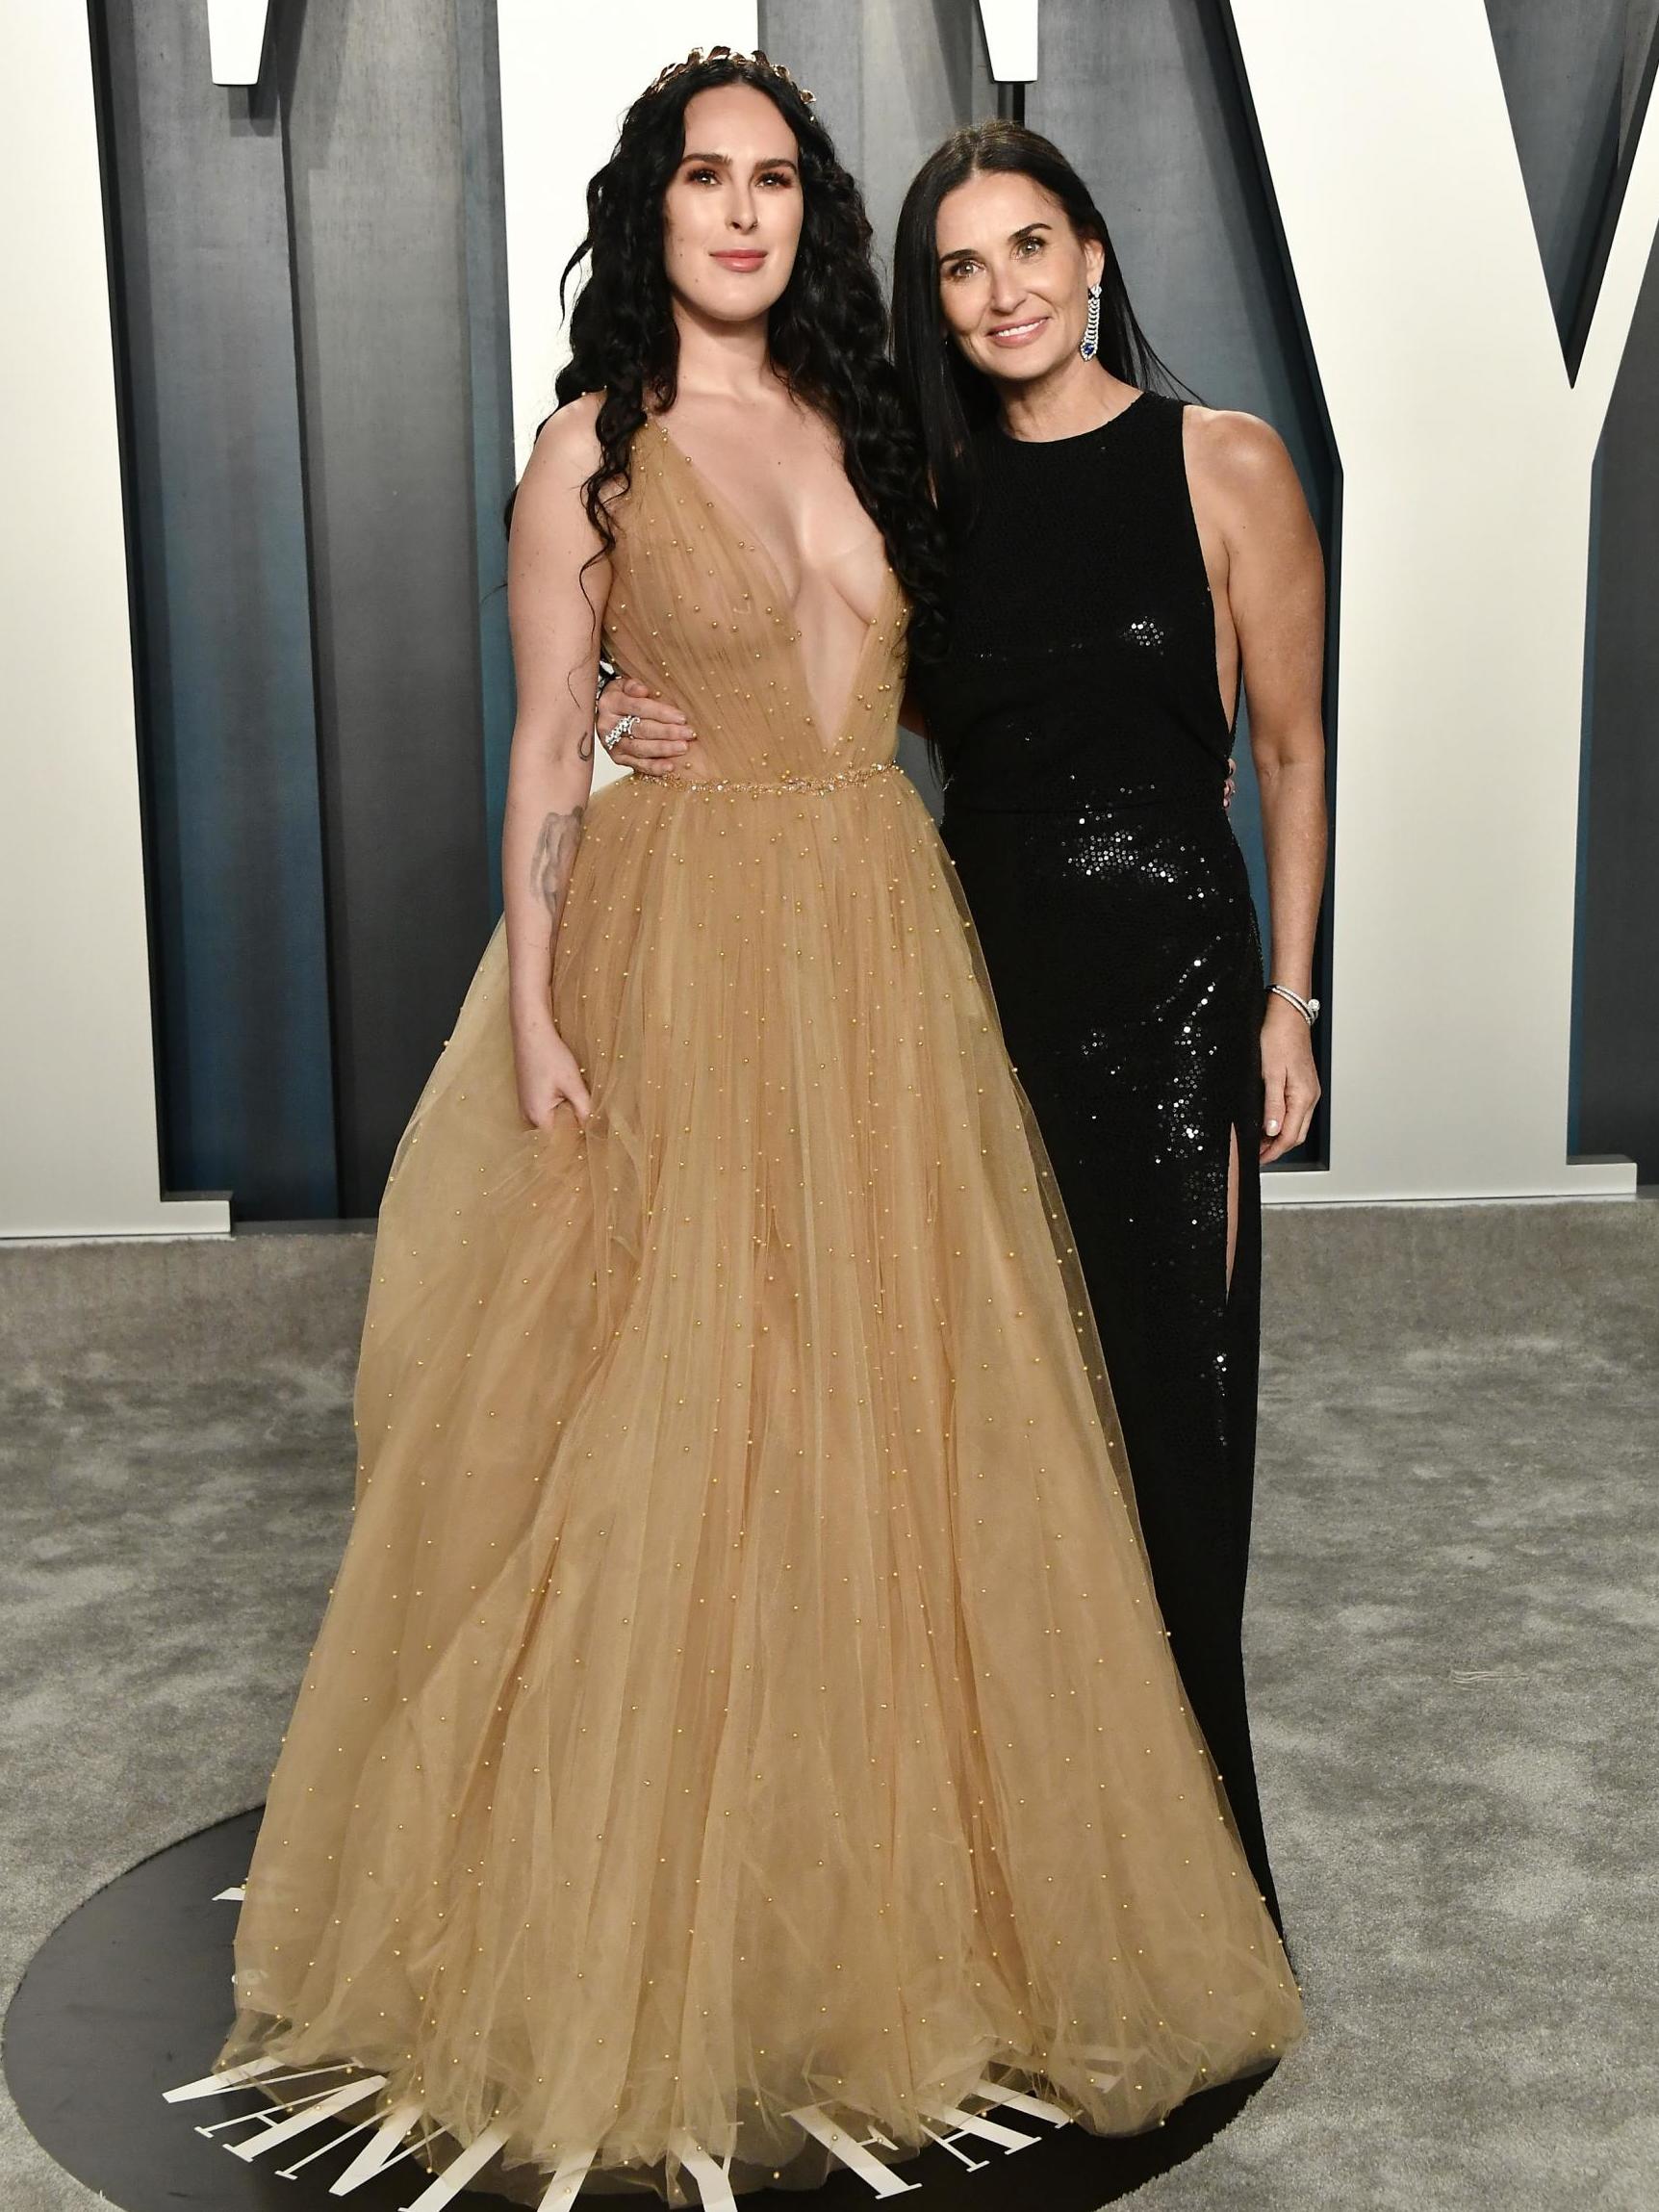 Moore and daughter Rumer Willis at the 2020 Vanity Fair Oscar party, 9 February